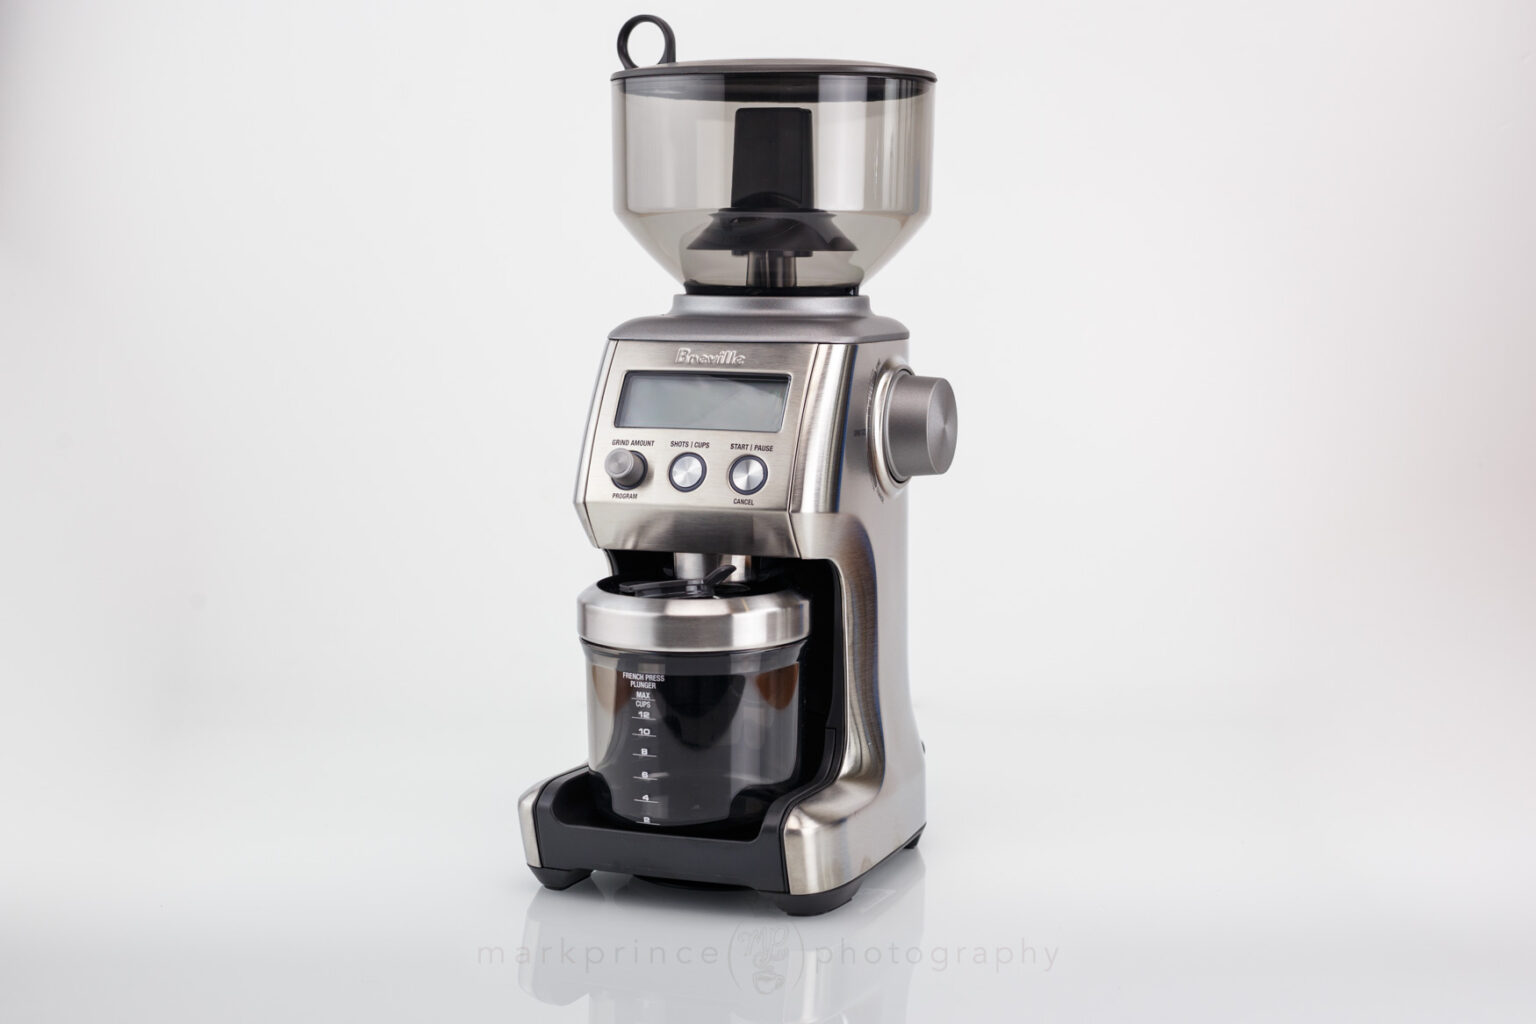 This is an early production version of the Smart Grinder Pro. It's virtually identical to the models shipping today.